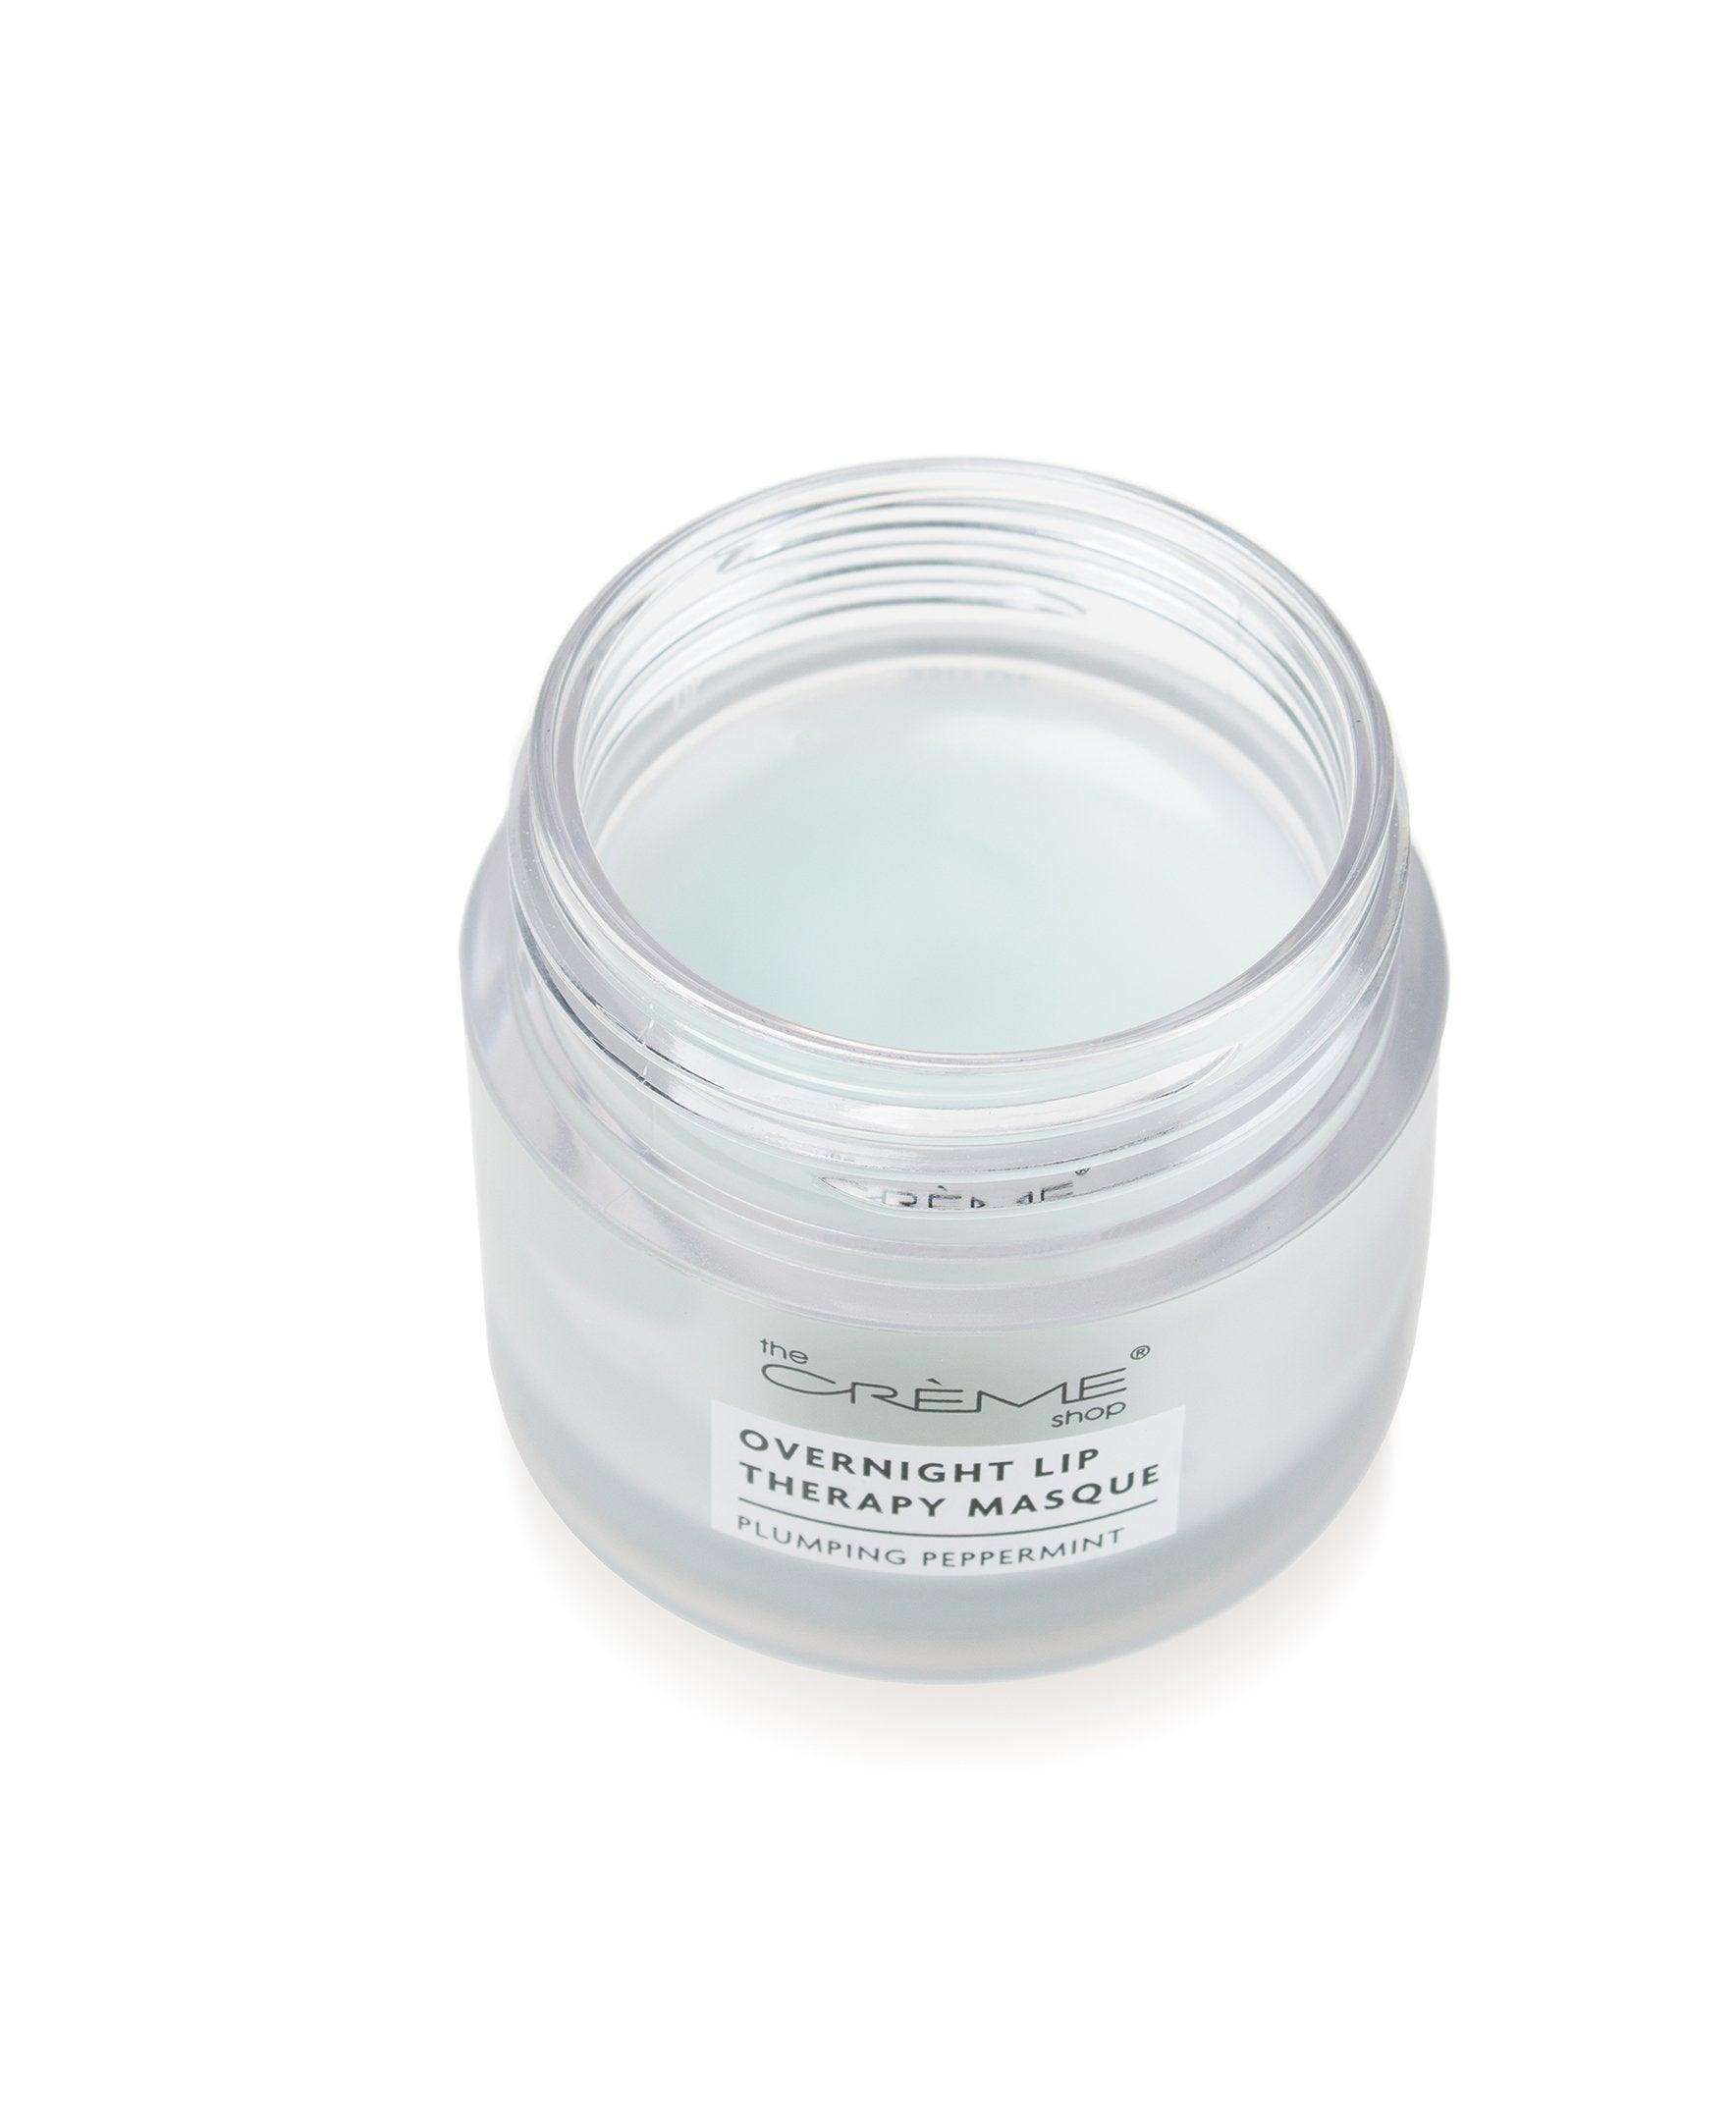 Overnight Lip Therapy Masque Plumping Peppermint - The Crème Shop